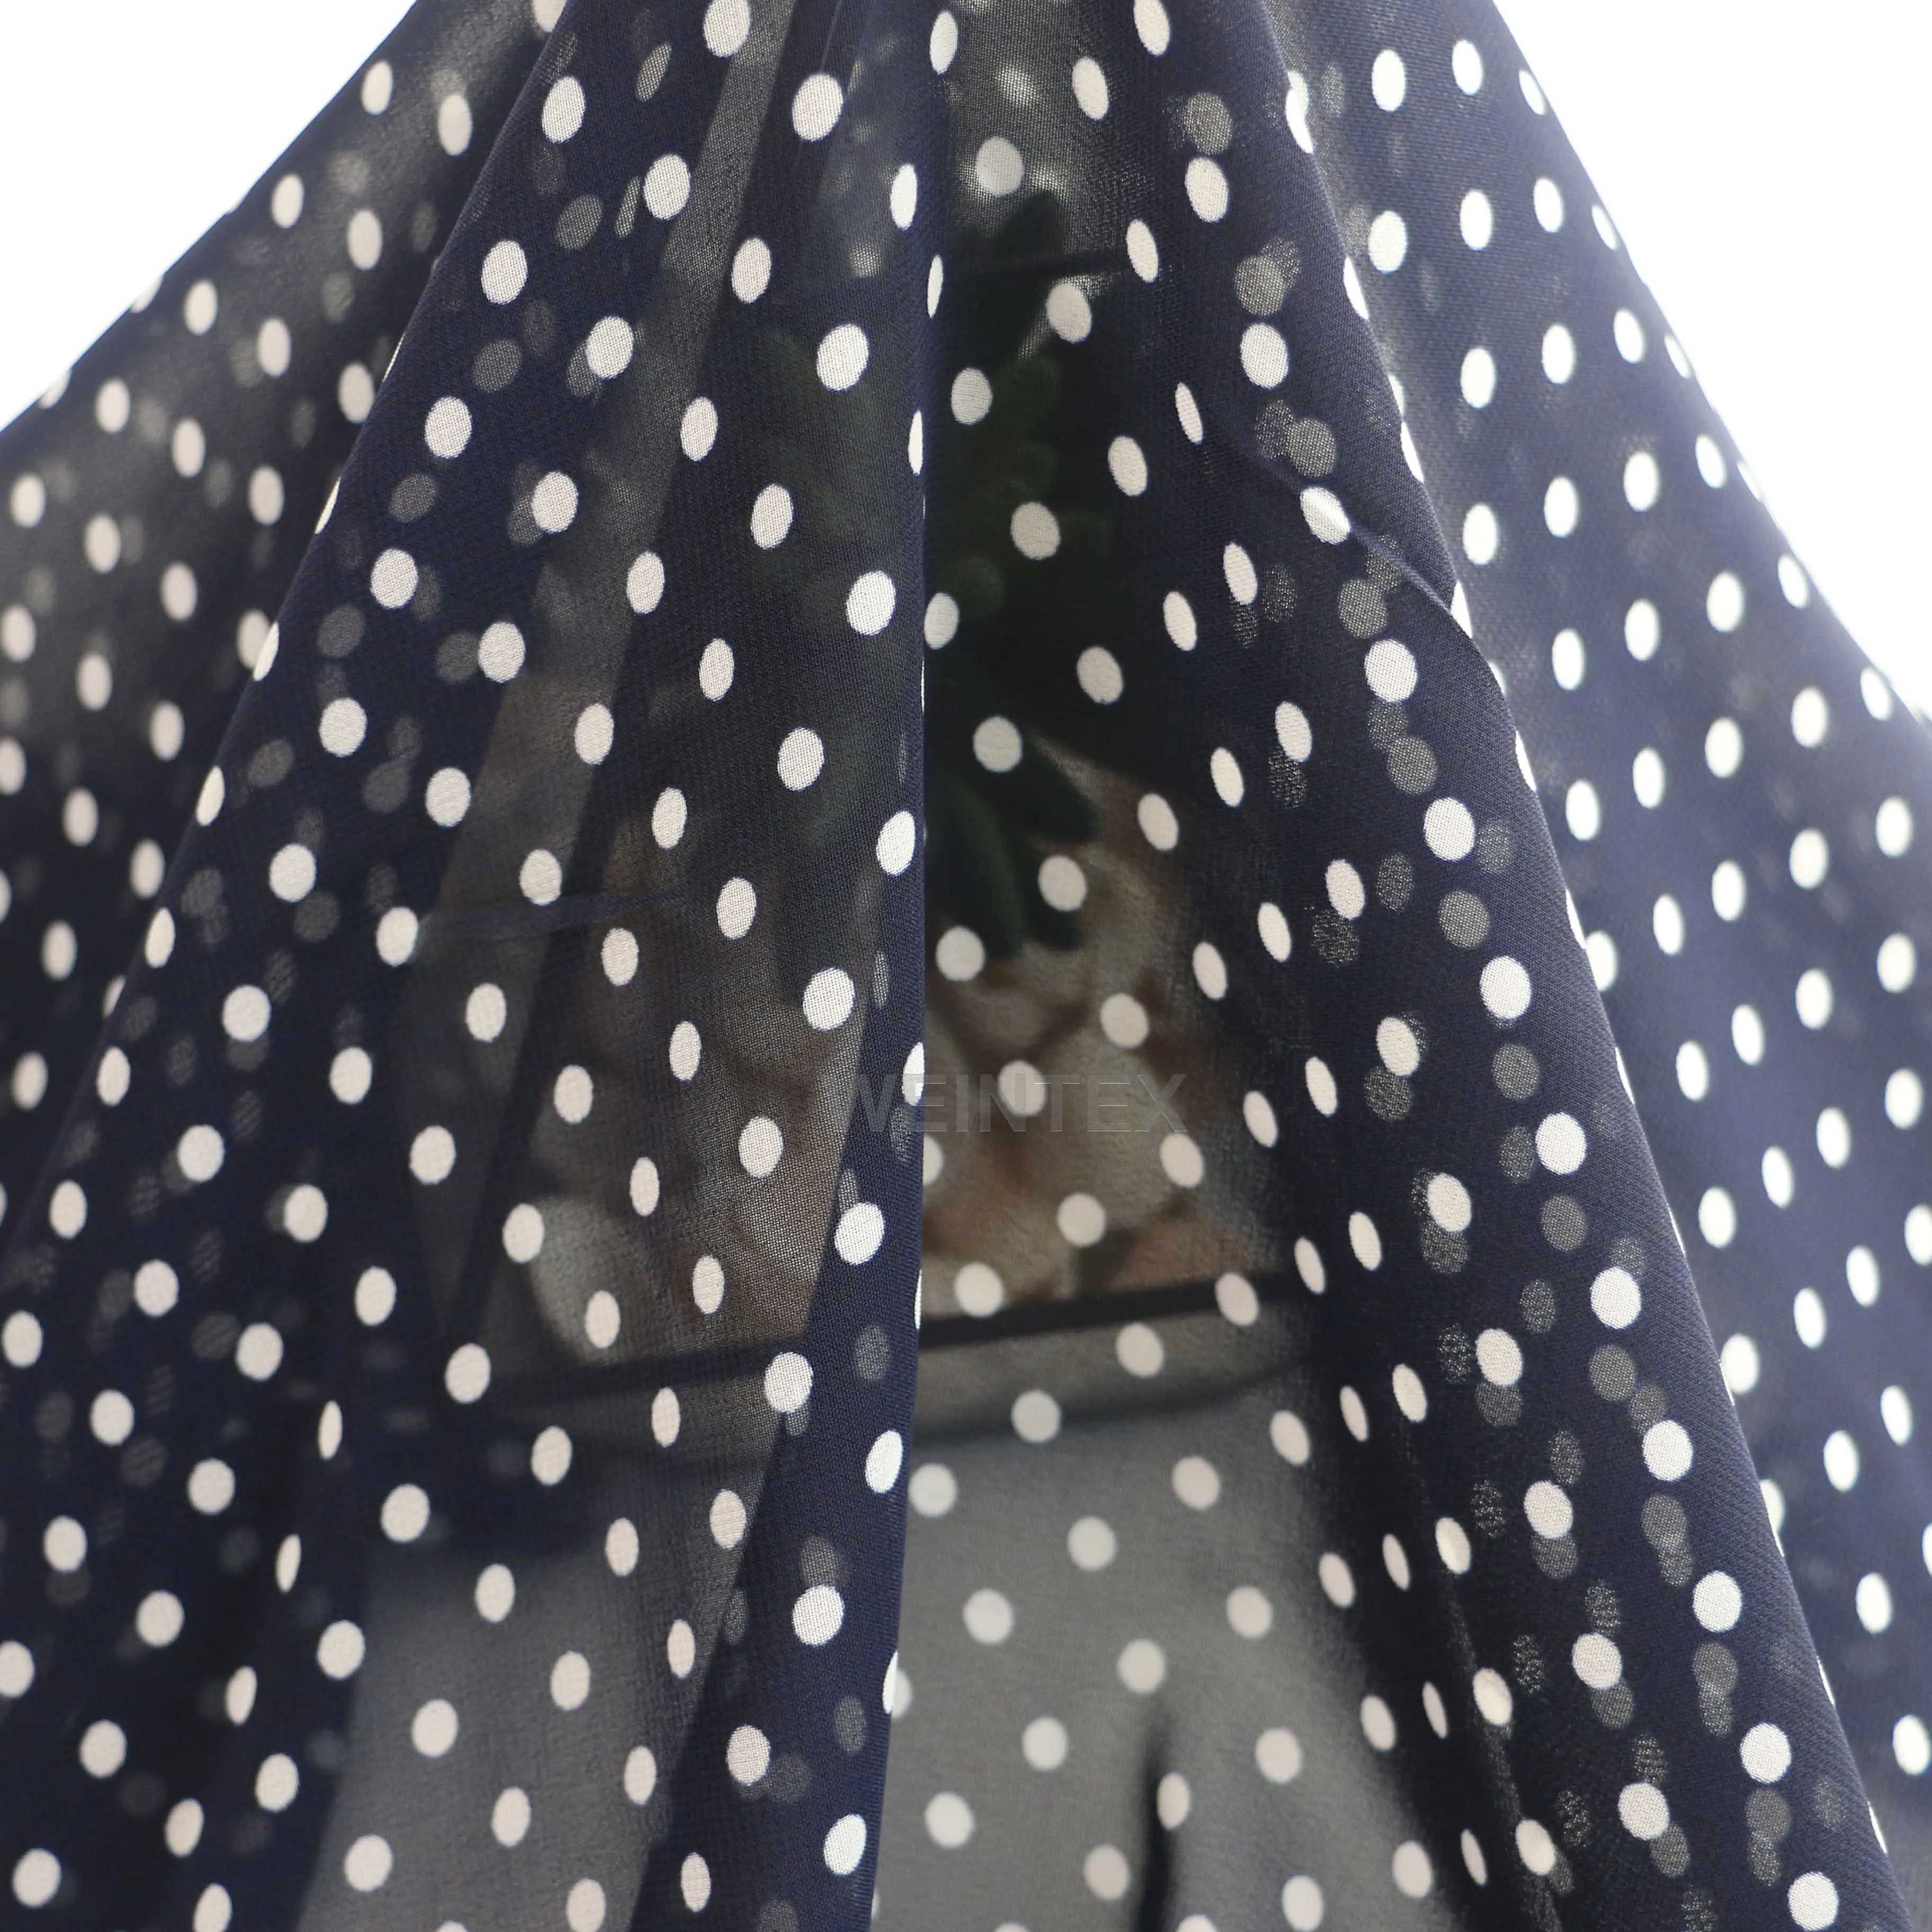 
WI-A07 China wholesale stock lot polyester 6mm polka dot chiffon fabric for dress and scarf 